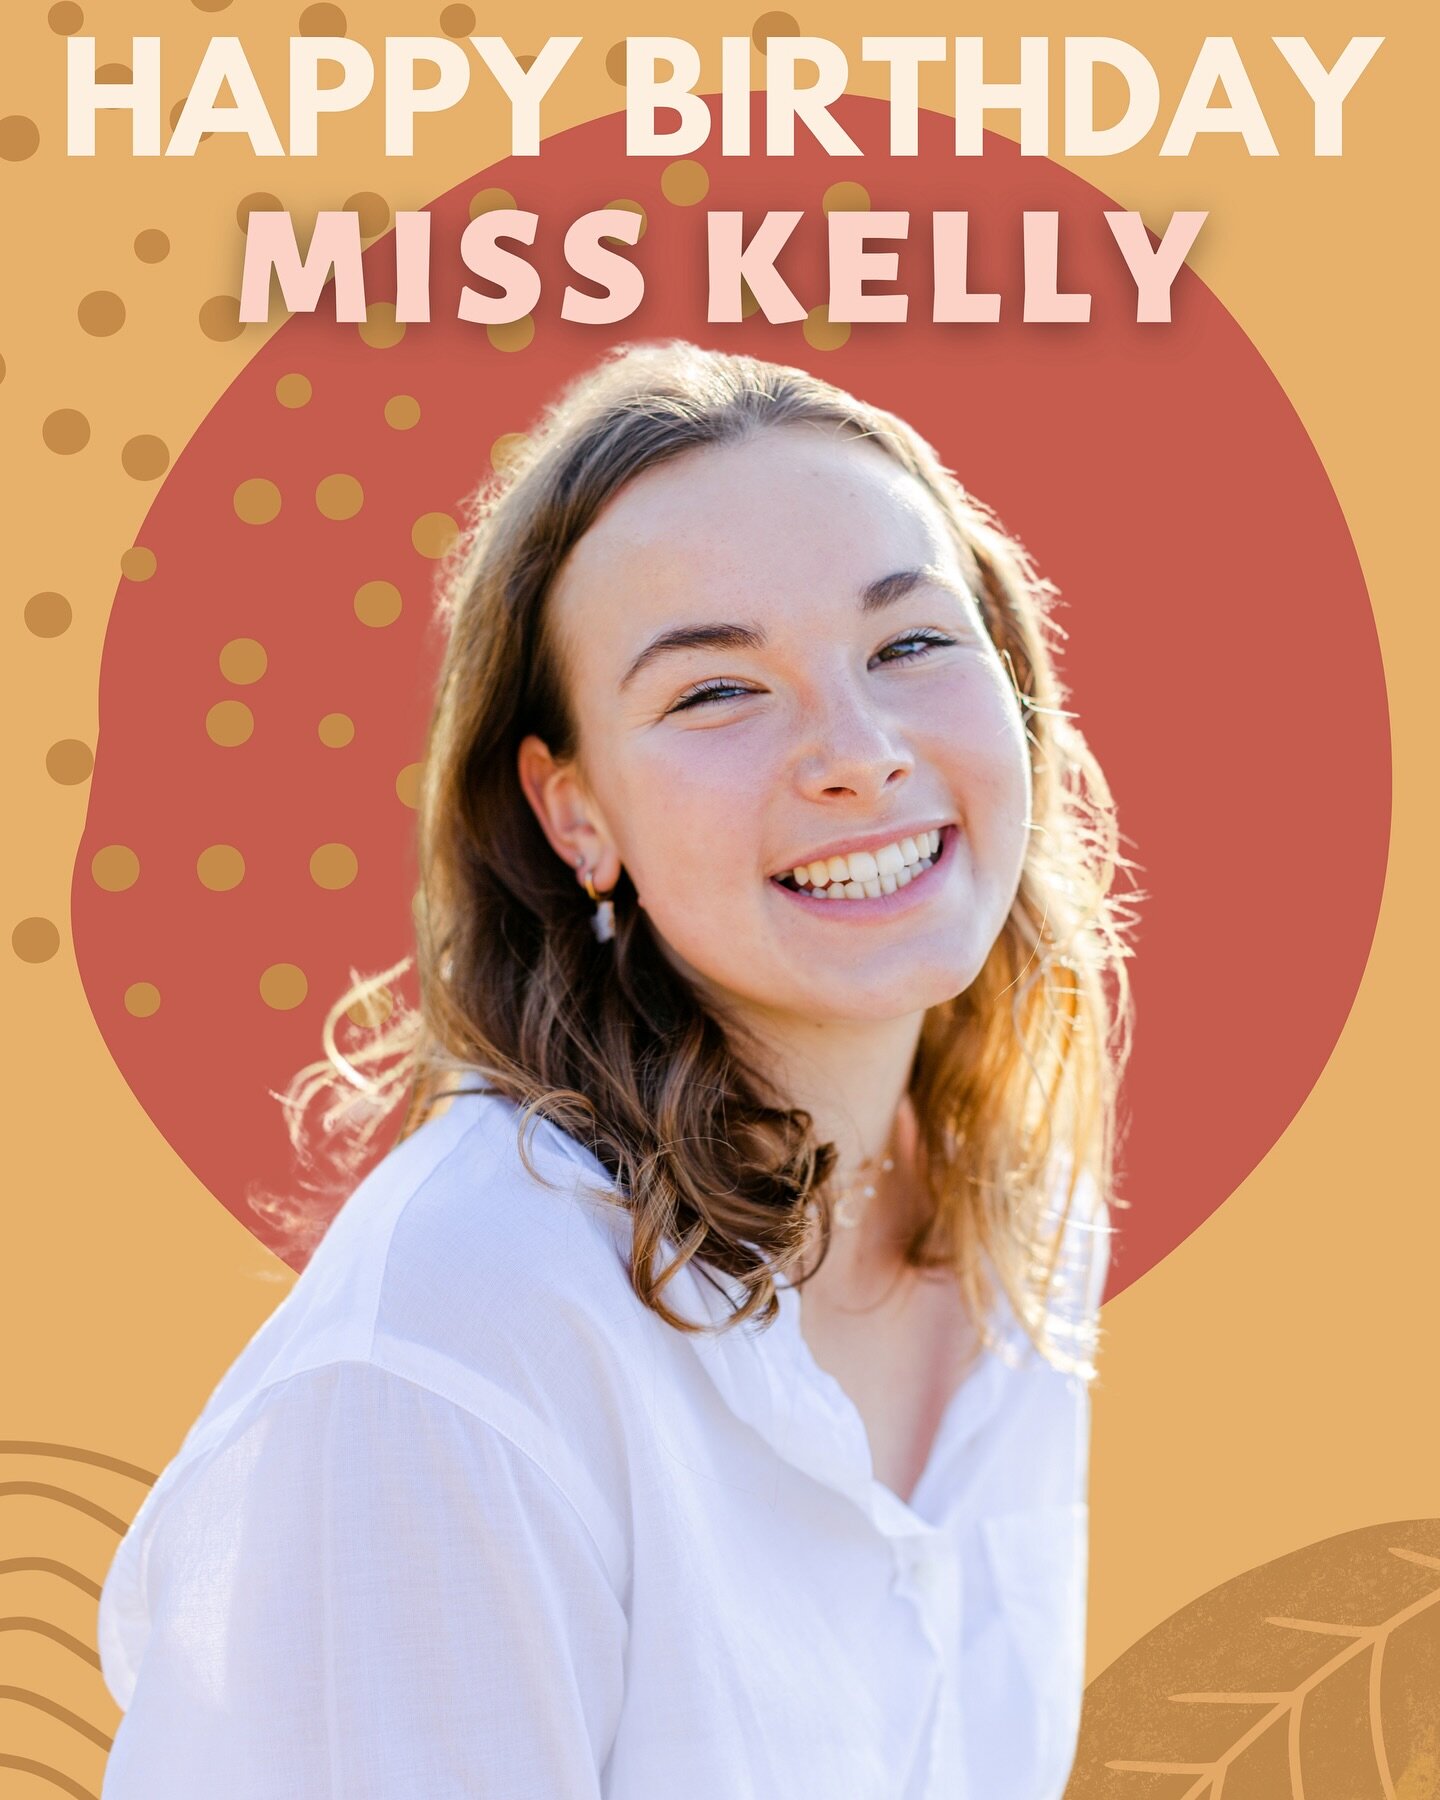 🎉 Join us in wishing 2nd year RAD Faculty @_kellykatherine_ a Happy Birthday!

💖 Happy Birthday, Miss Kelly! Thank you for your sharing your talents and passion with our RAD Dancers! Your positivity shines bright &amp; dedication does not go unnoti